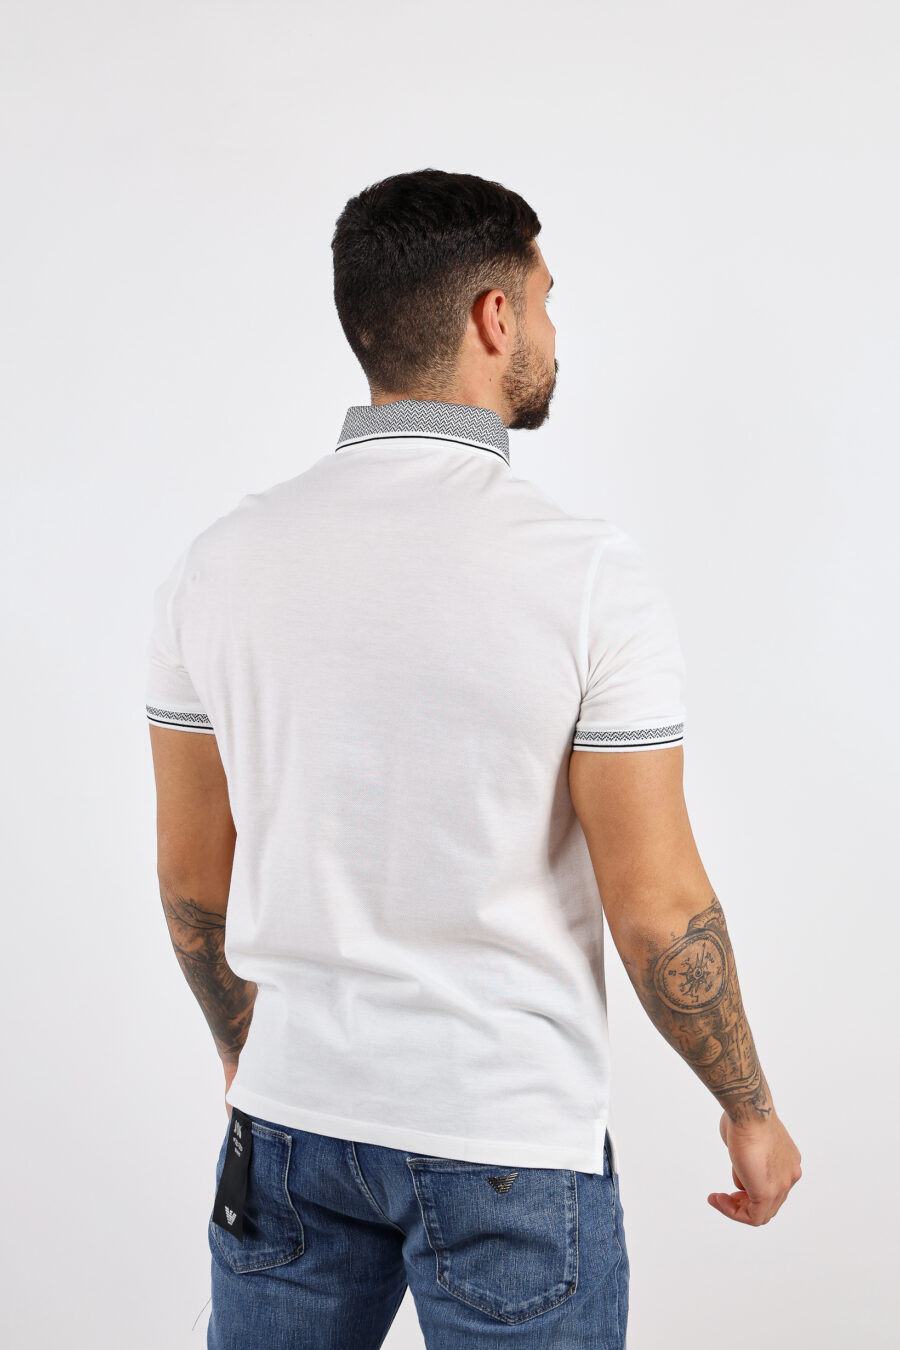 White polo shirt with classic grey collar - BLS Fashion 44